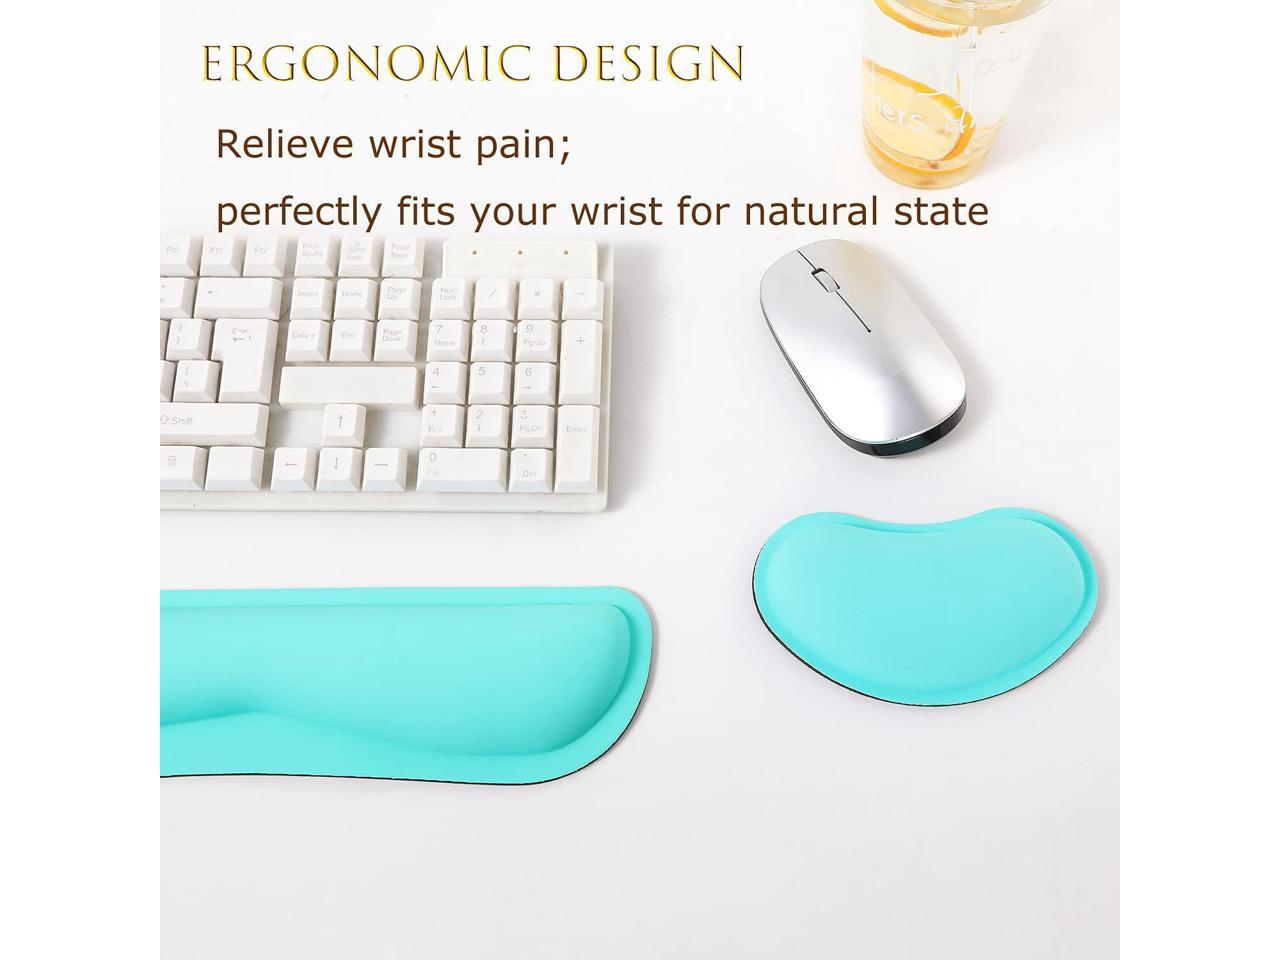 Ergonomic Memory Foam Pain Relief laptops Office -Blue… kusma Pink Wrist Rest Keyboard Wrist Rest Pad,Cleanable PU Leather Support for Computers 